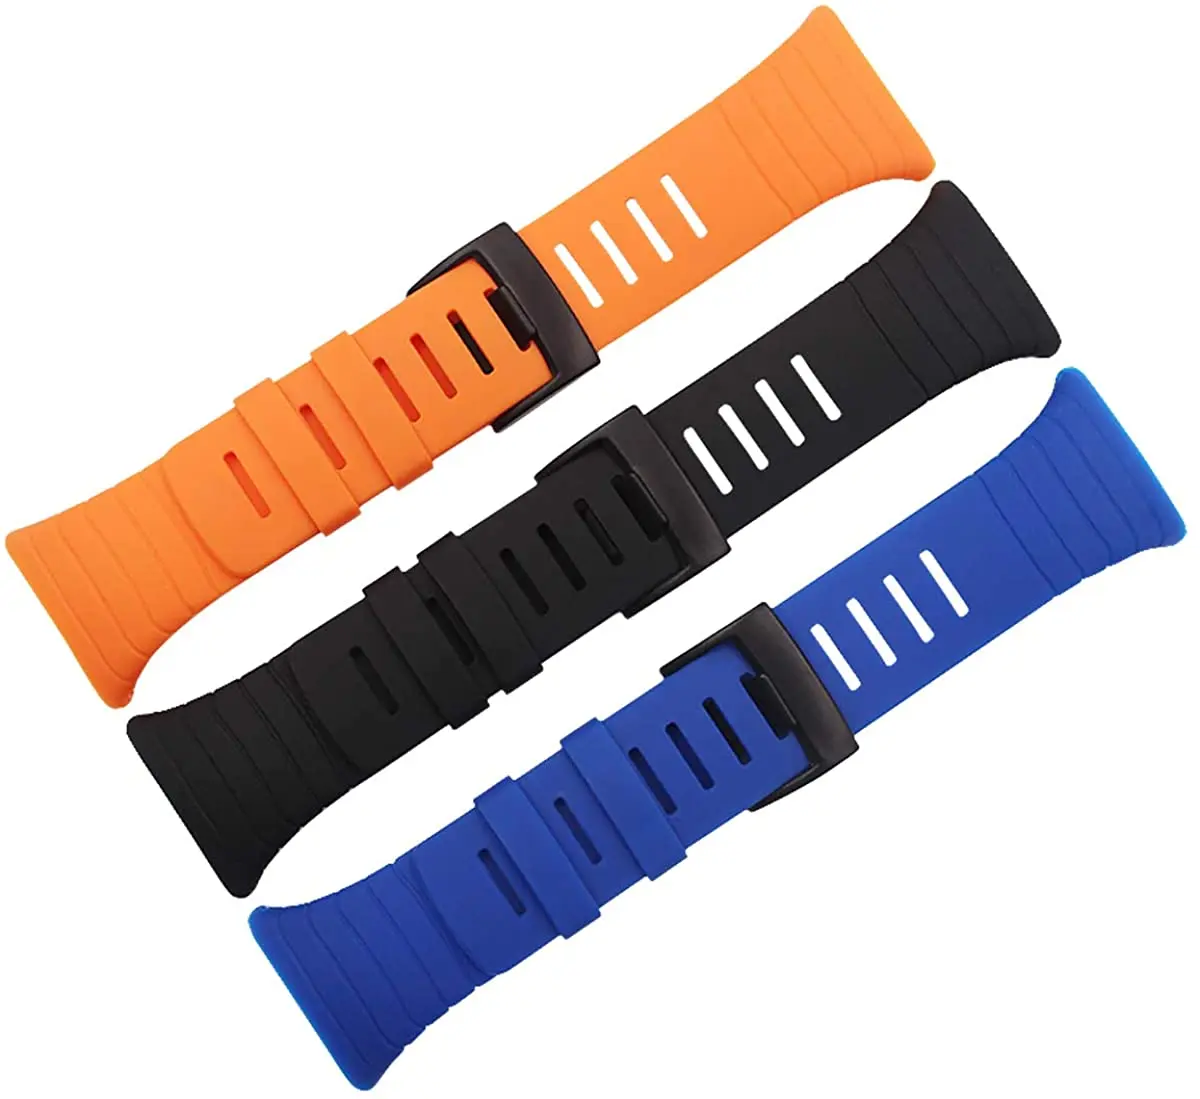 Replacement Band Compatible with suunto core All Black Watch Band Waterproof Sports Rubber Strap  watch bands Wrist band buckle